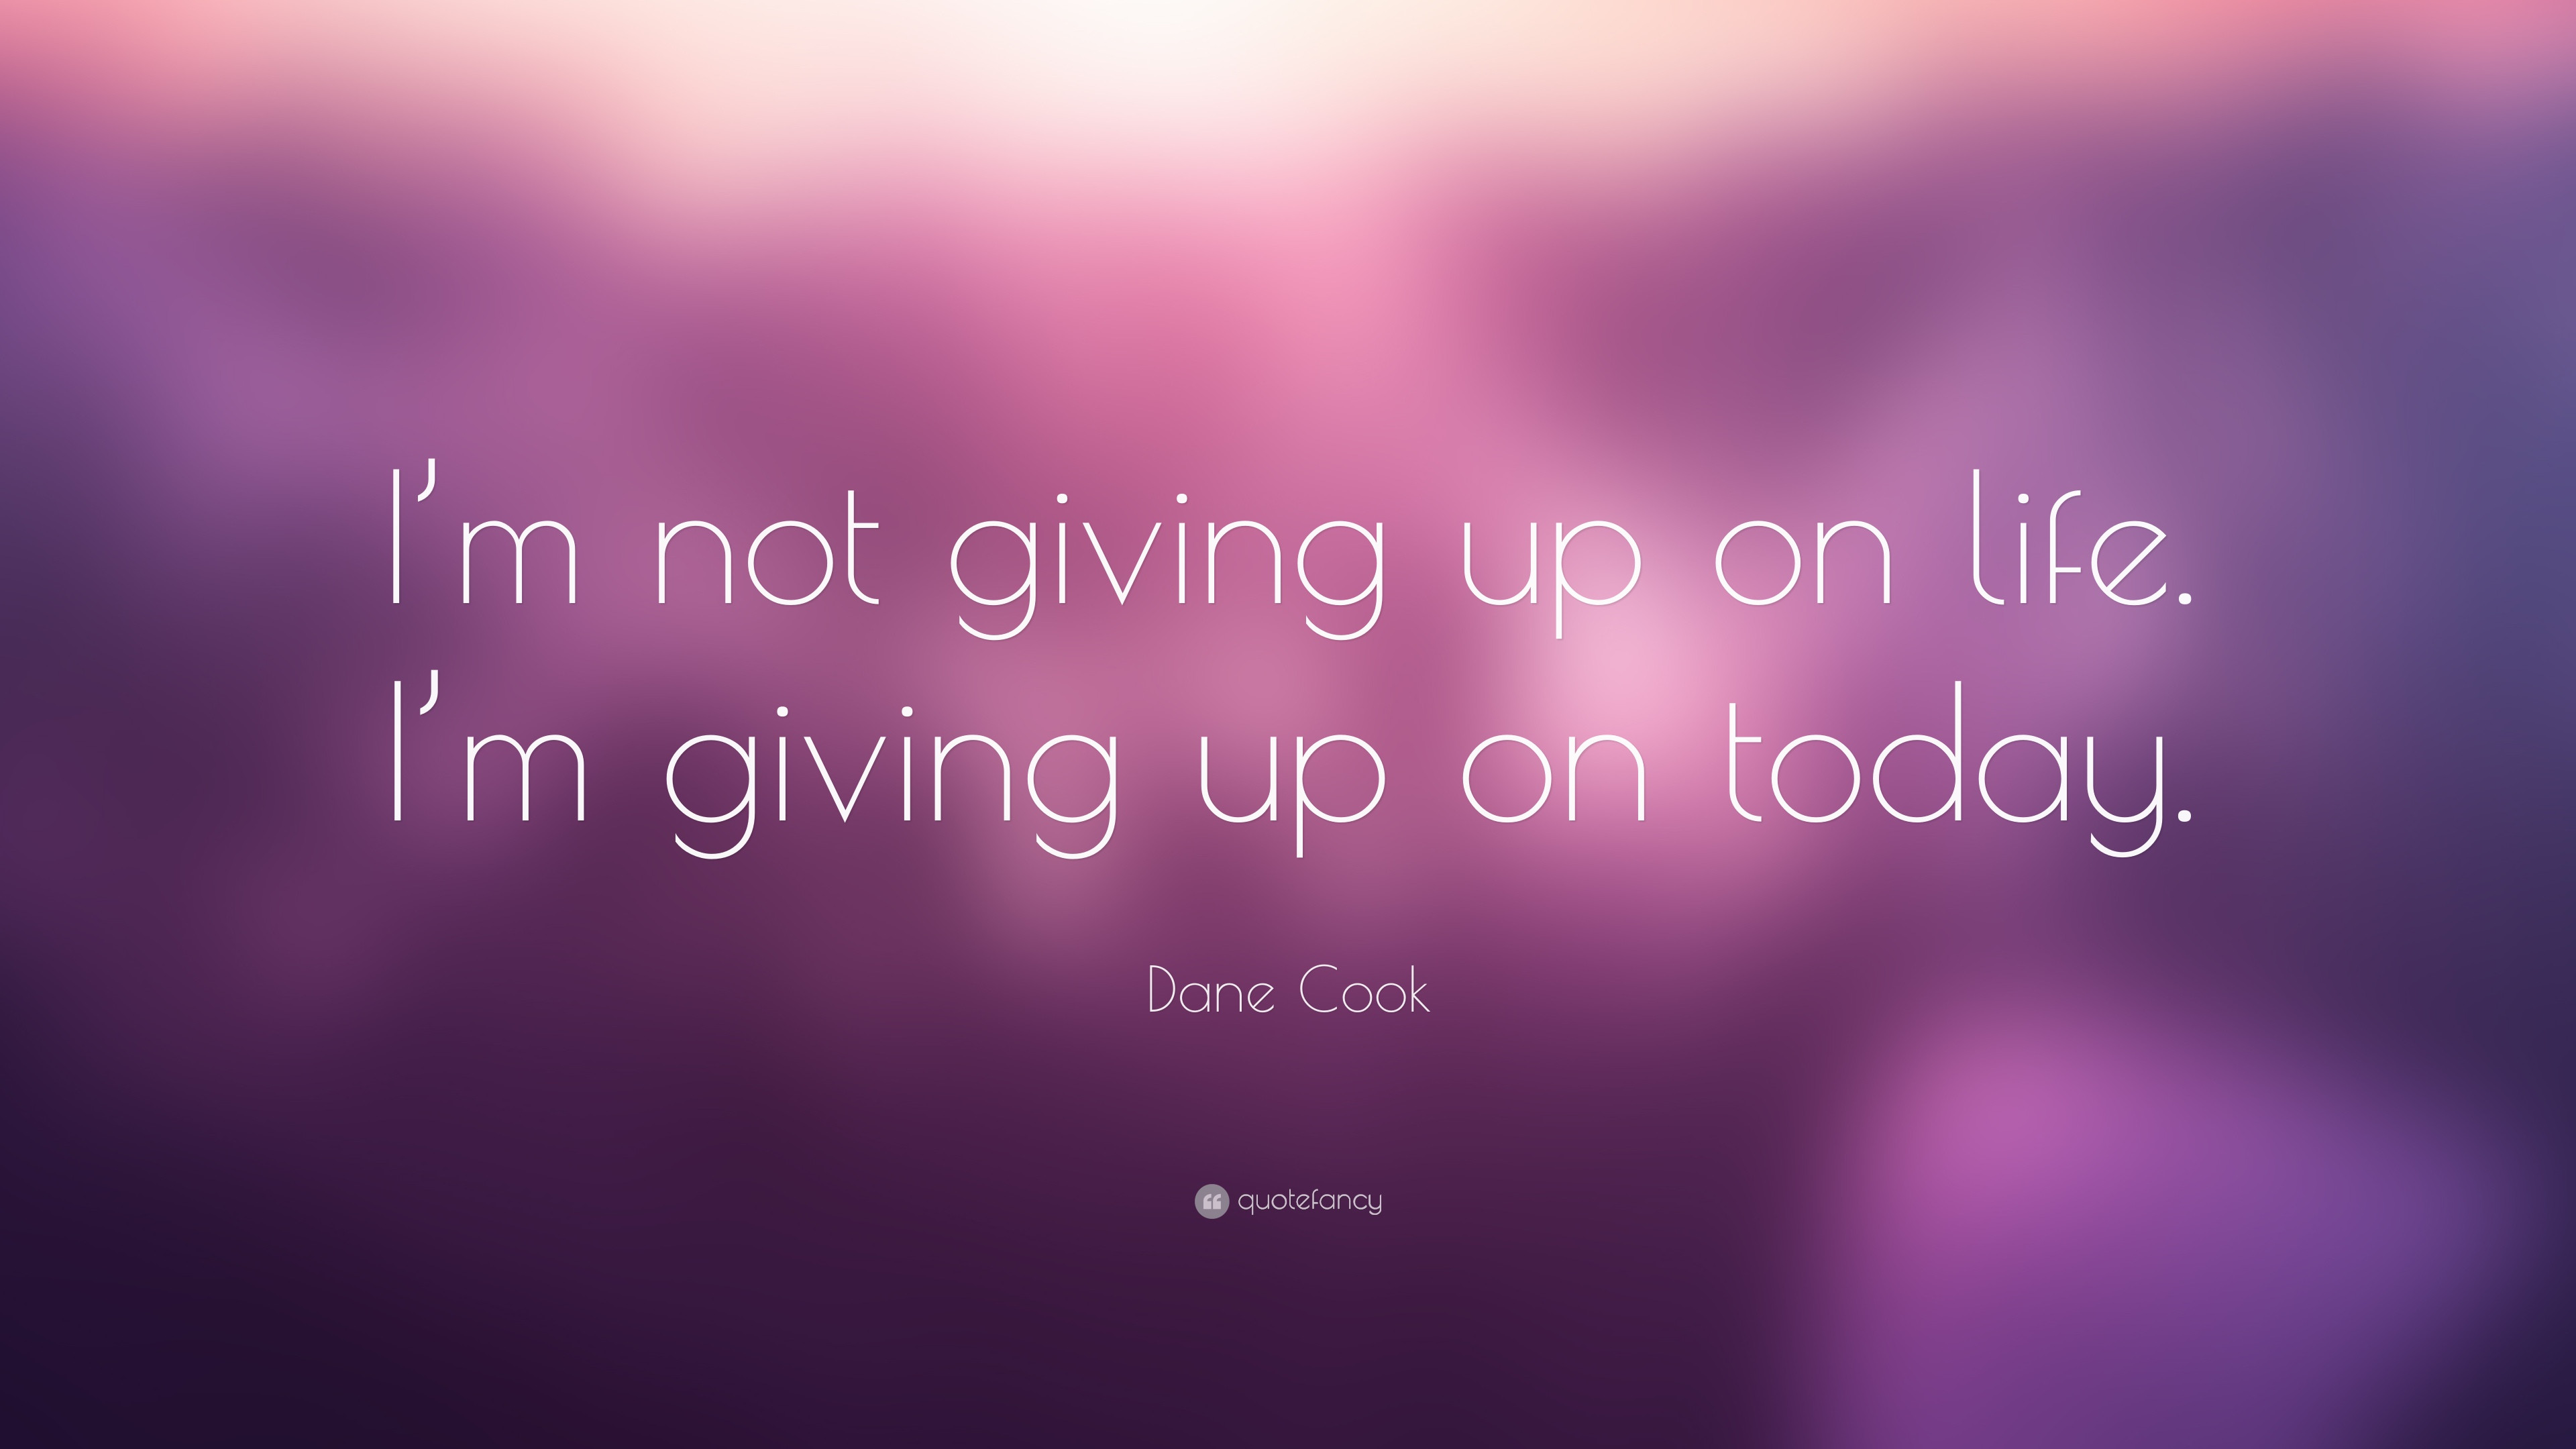 Quotes About Giving Up On Life
 Not Giving Up Quotes 32 wallpapers Quotefancy